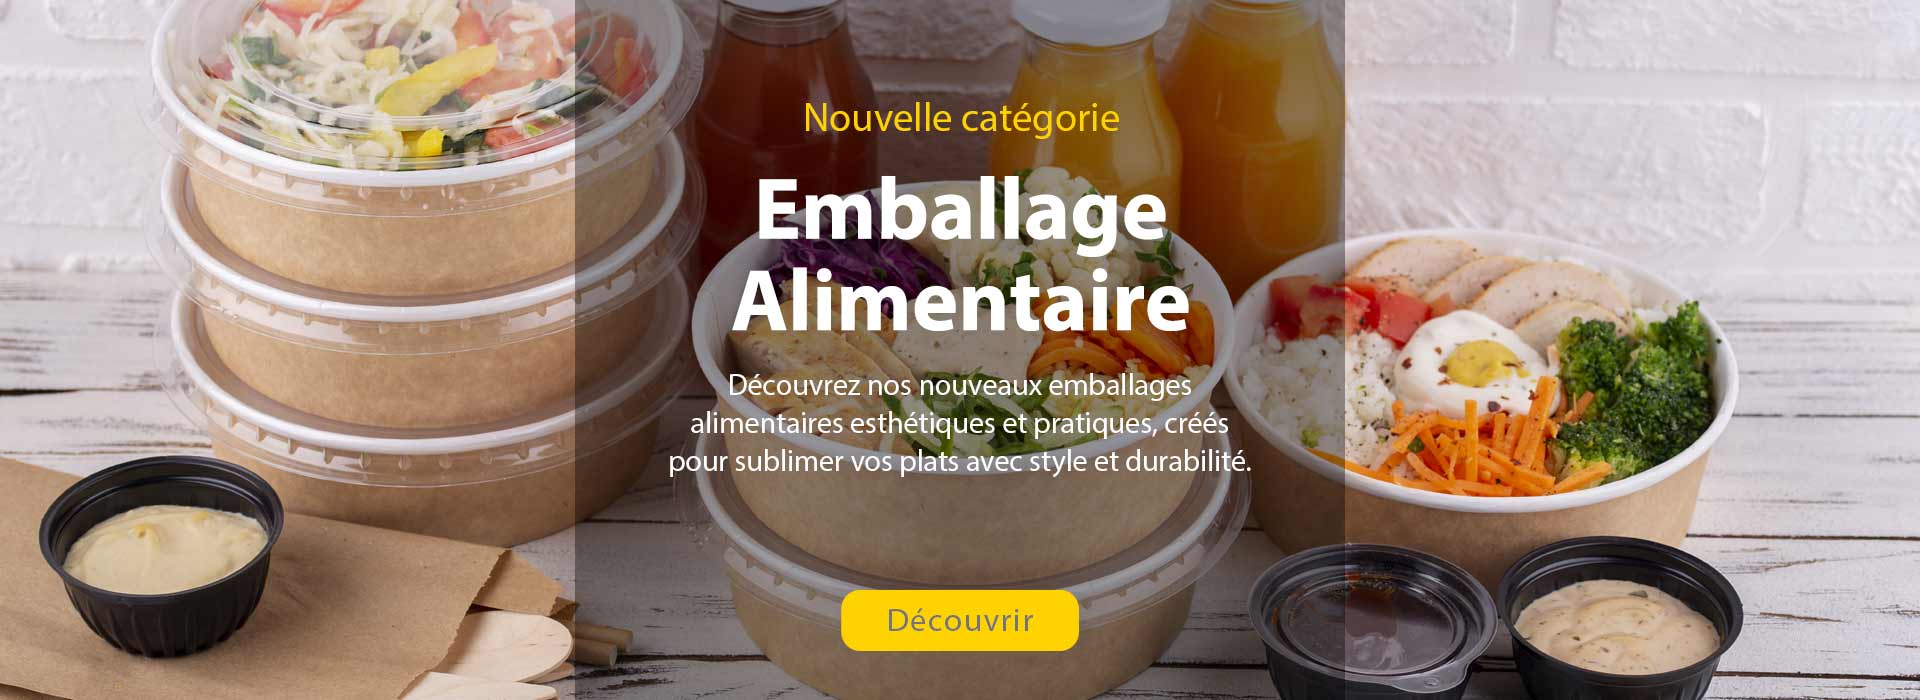 emballage alimentaire